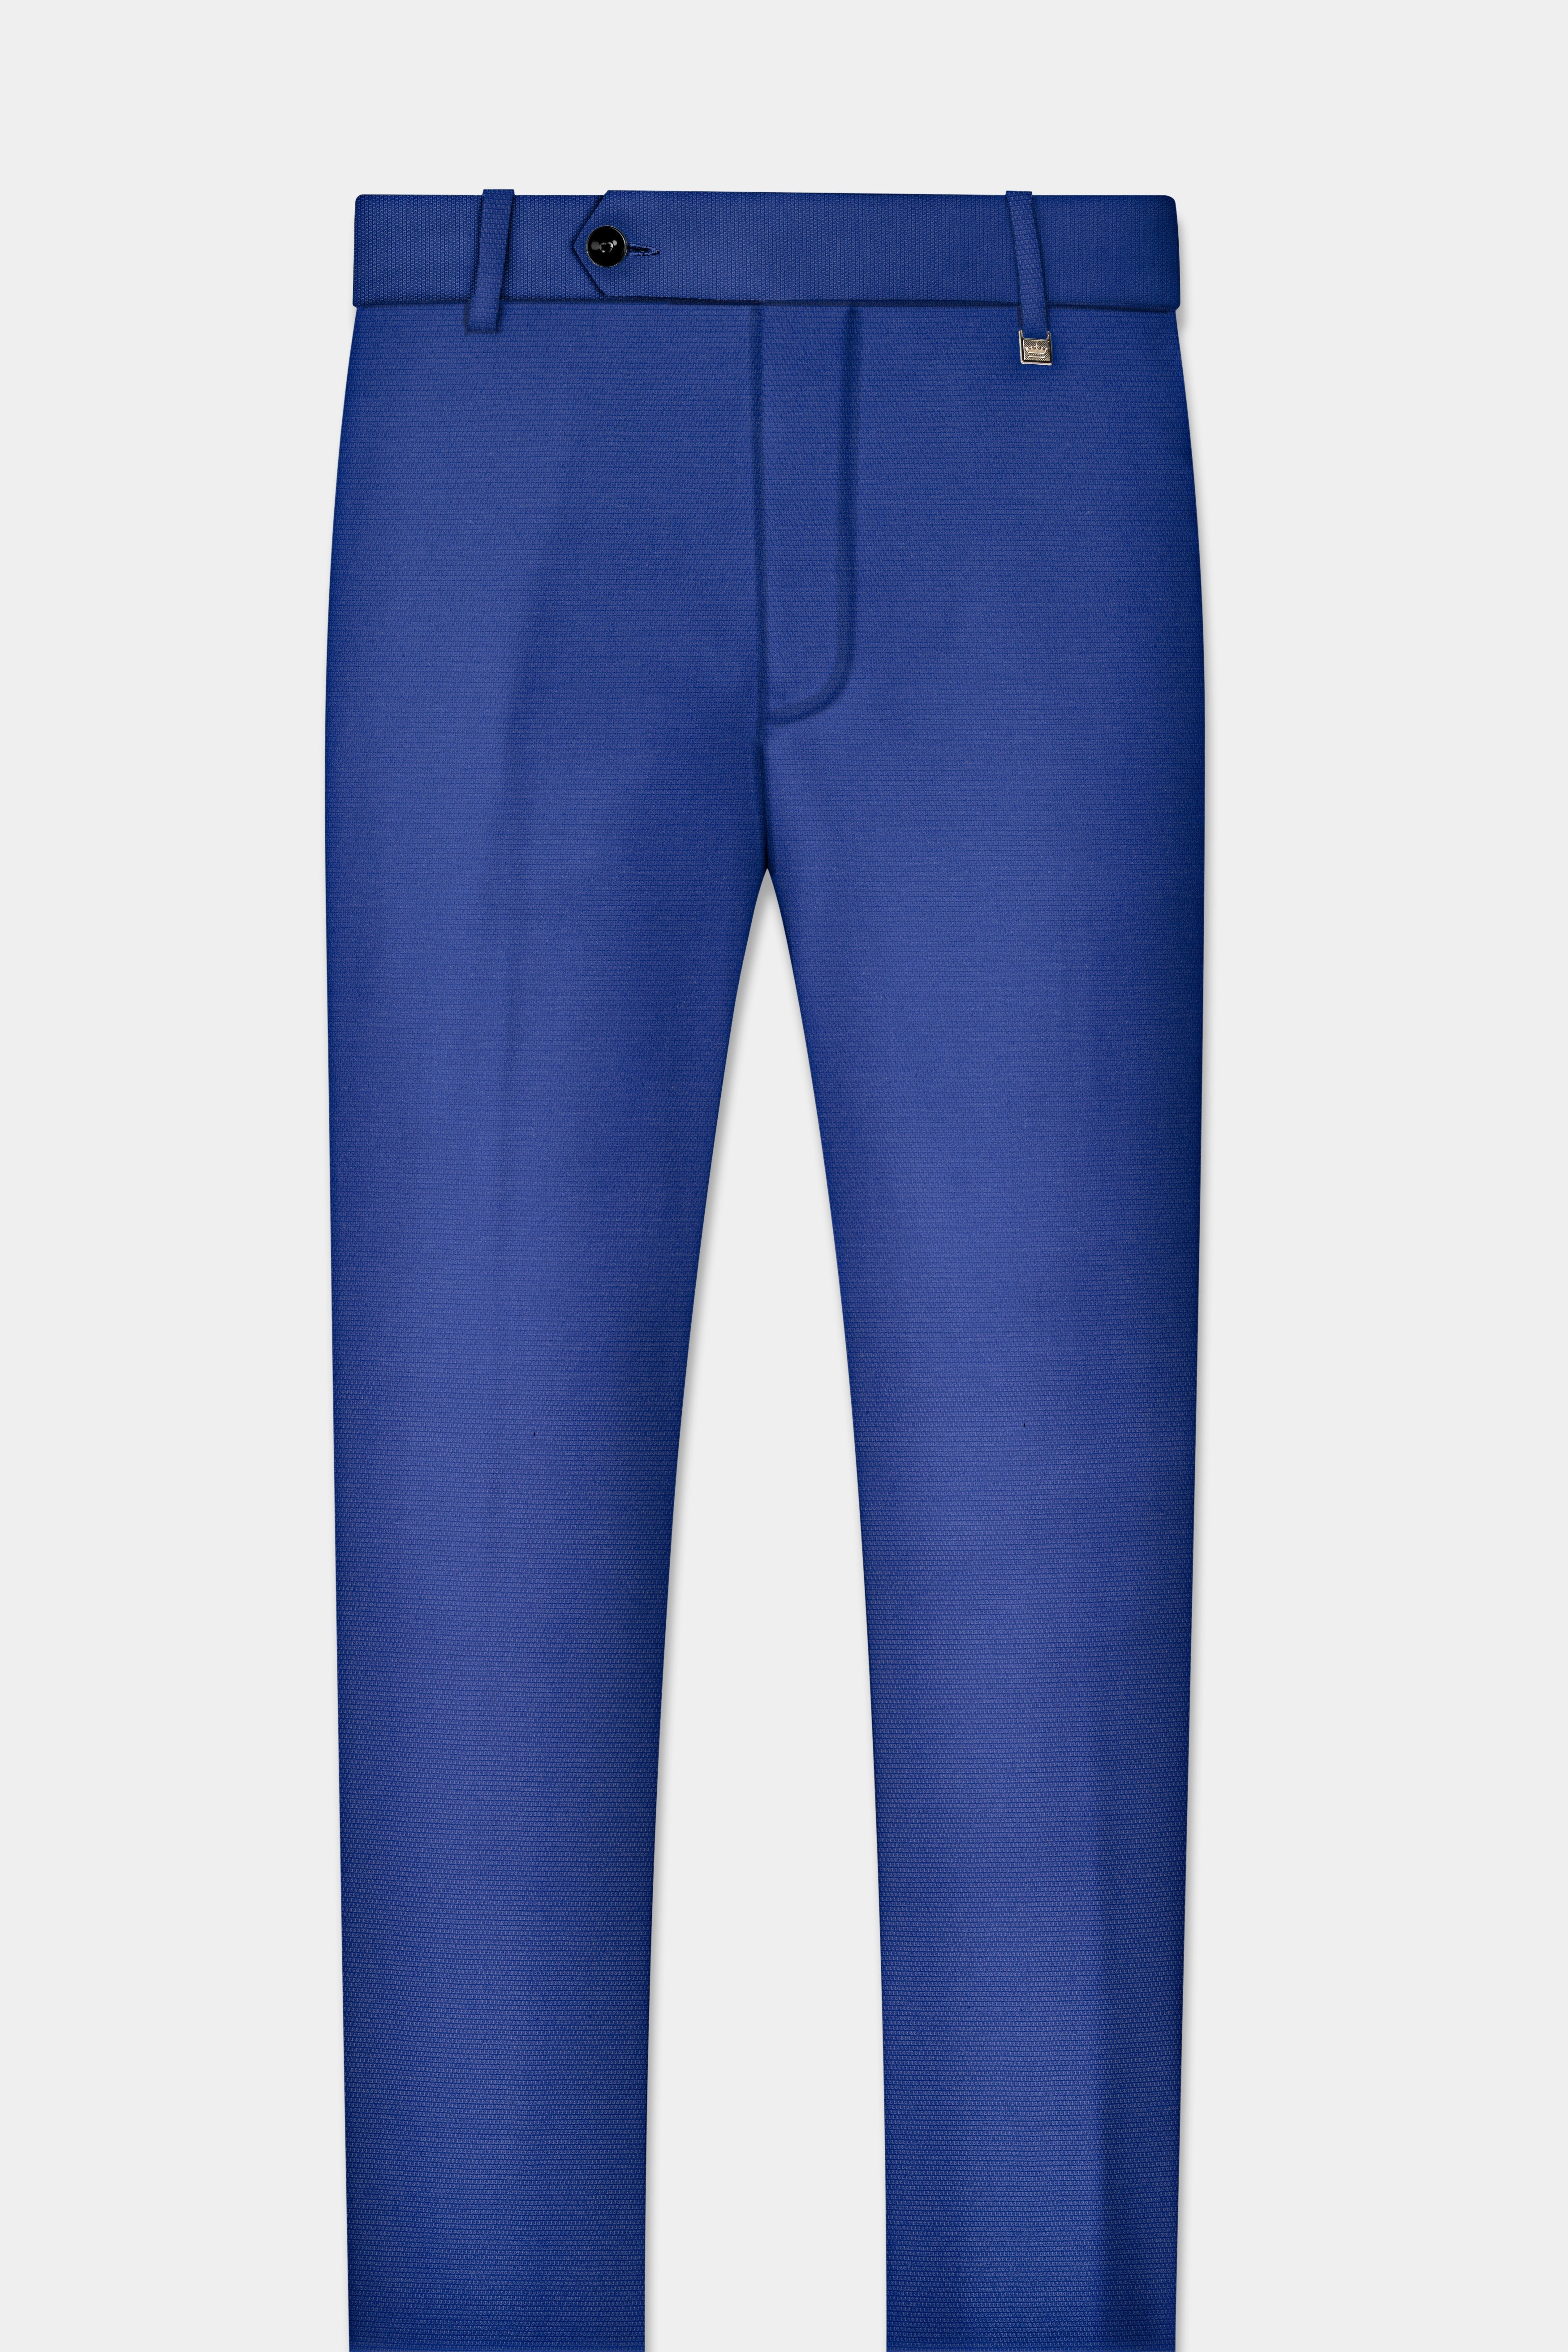 Catalina Blue Double-Breasted Wool Blend Suit